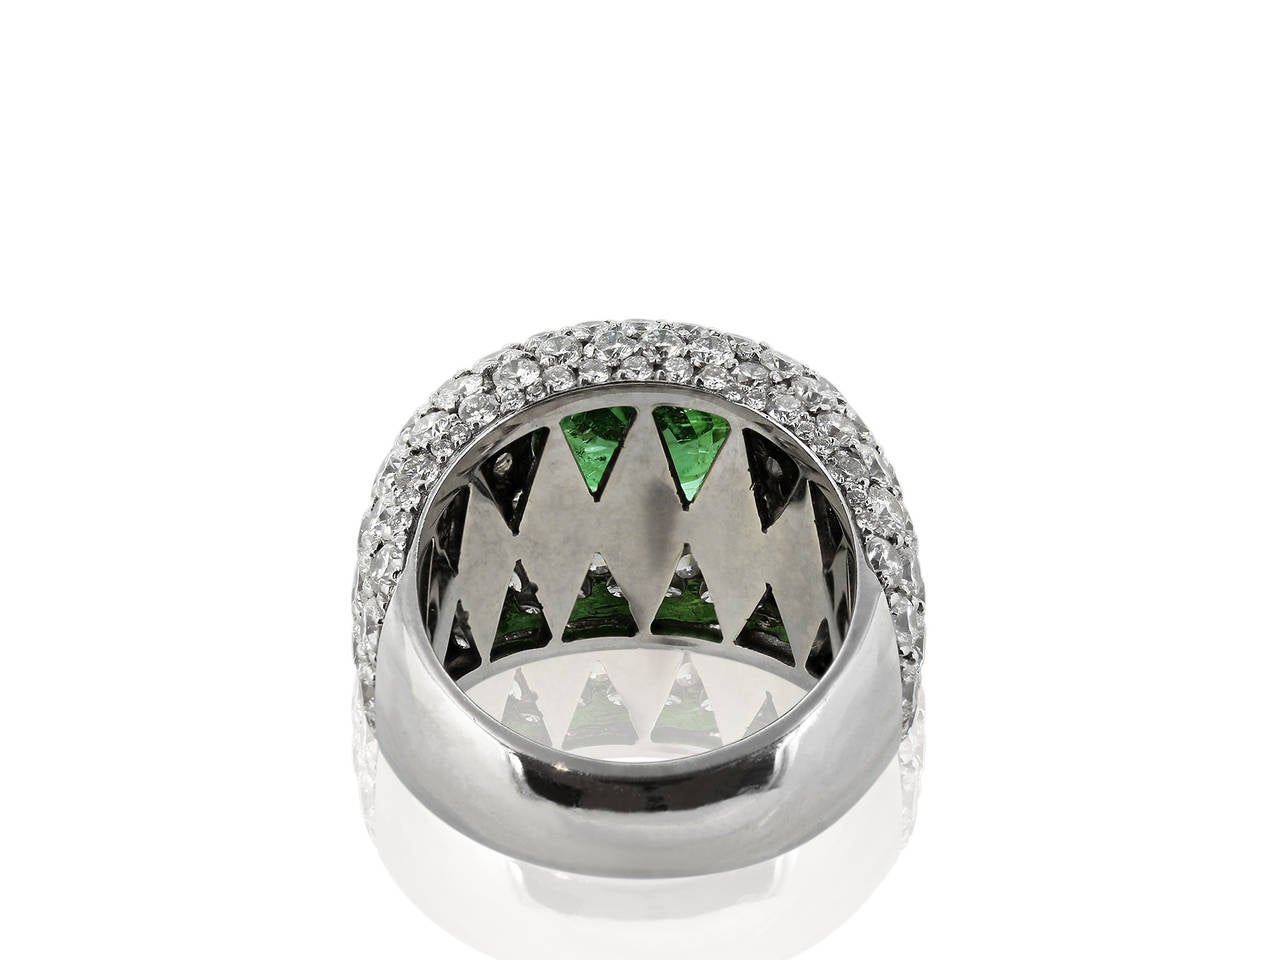 18 karat white gold dome ring consisting of 1 oval shaped green Parabia Tourmaline weighing 2.69 carats with GIA certificate #6107027812  stating Brazilian Paraiba Tourmaline set with 4.91 carats of round brilliant cut diamonds.